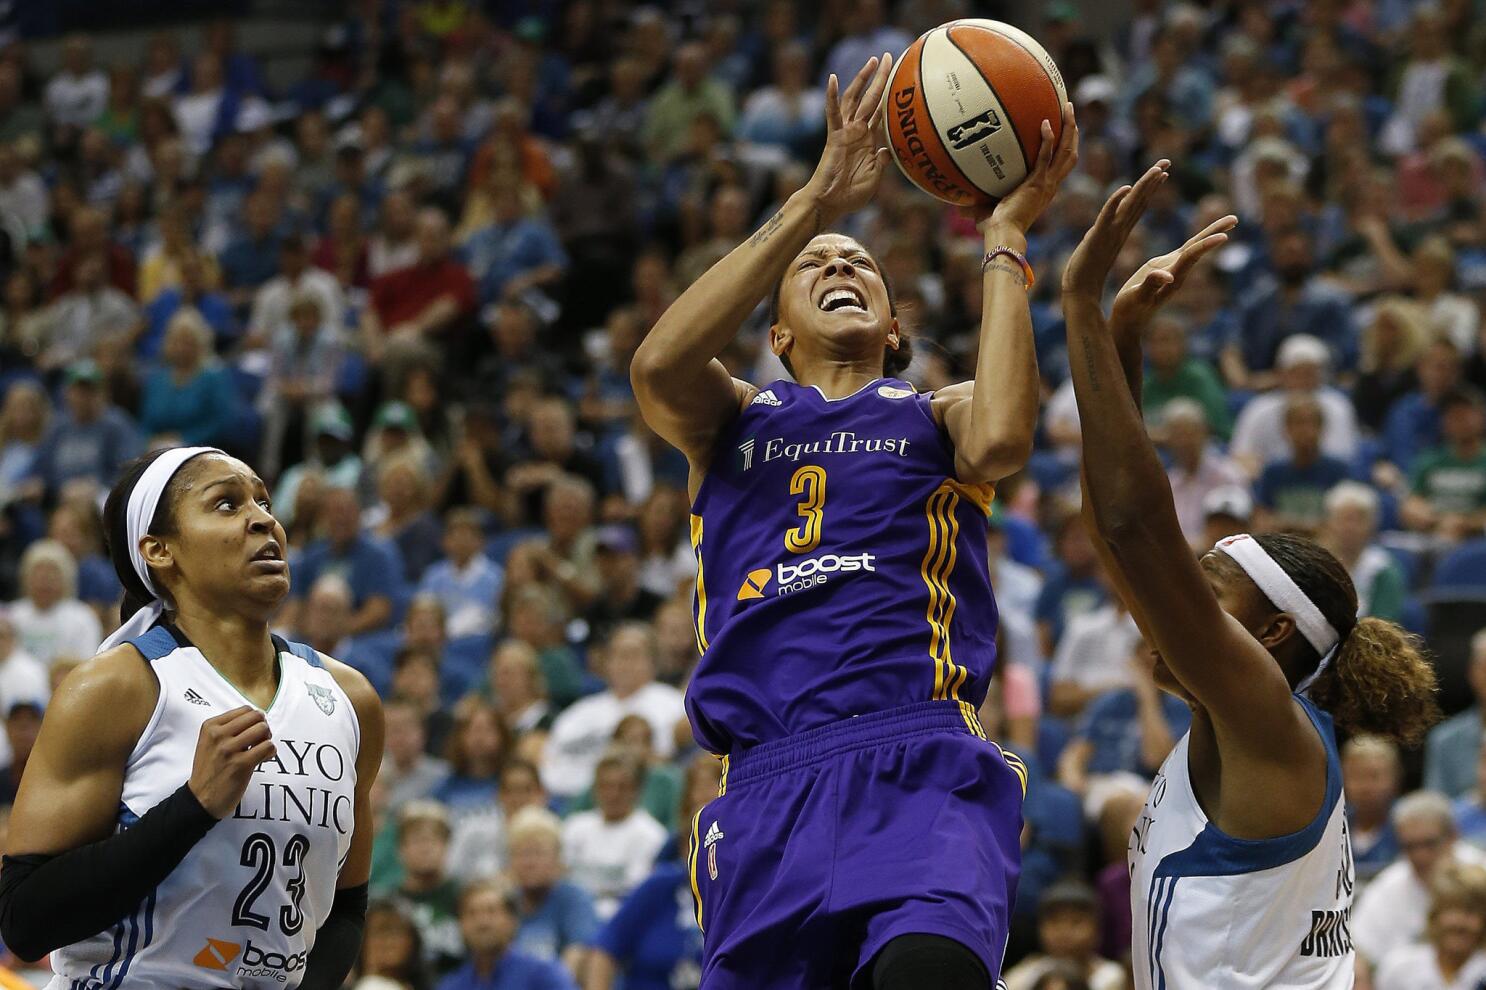 The Lynx-Sparks rivalry will waste no time getting intense this